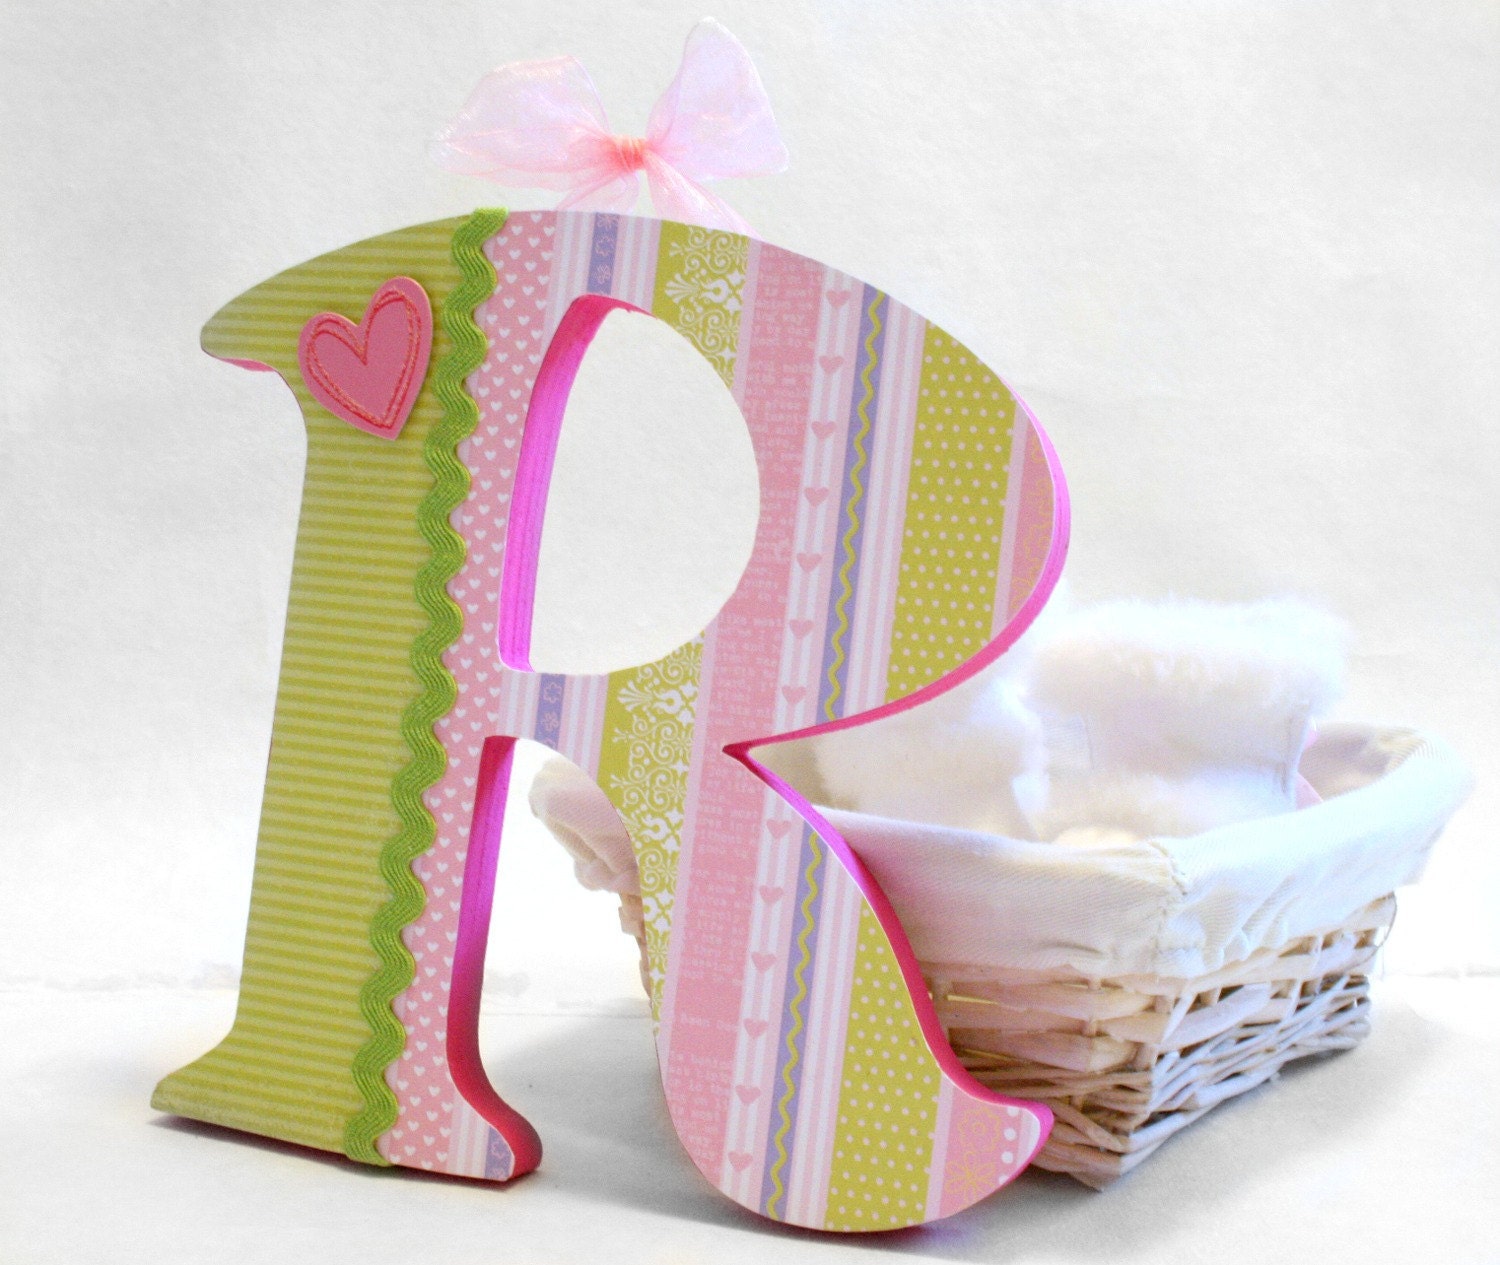 Set of 2 letters baby name design your own by RivergroveDesigns